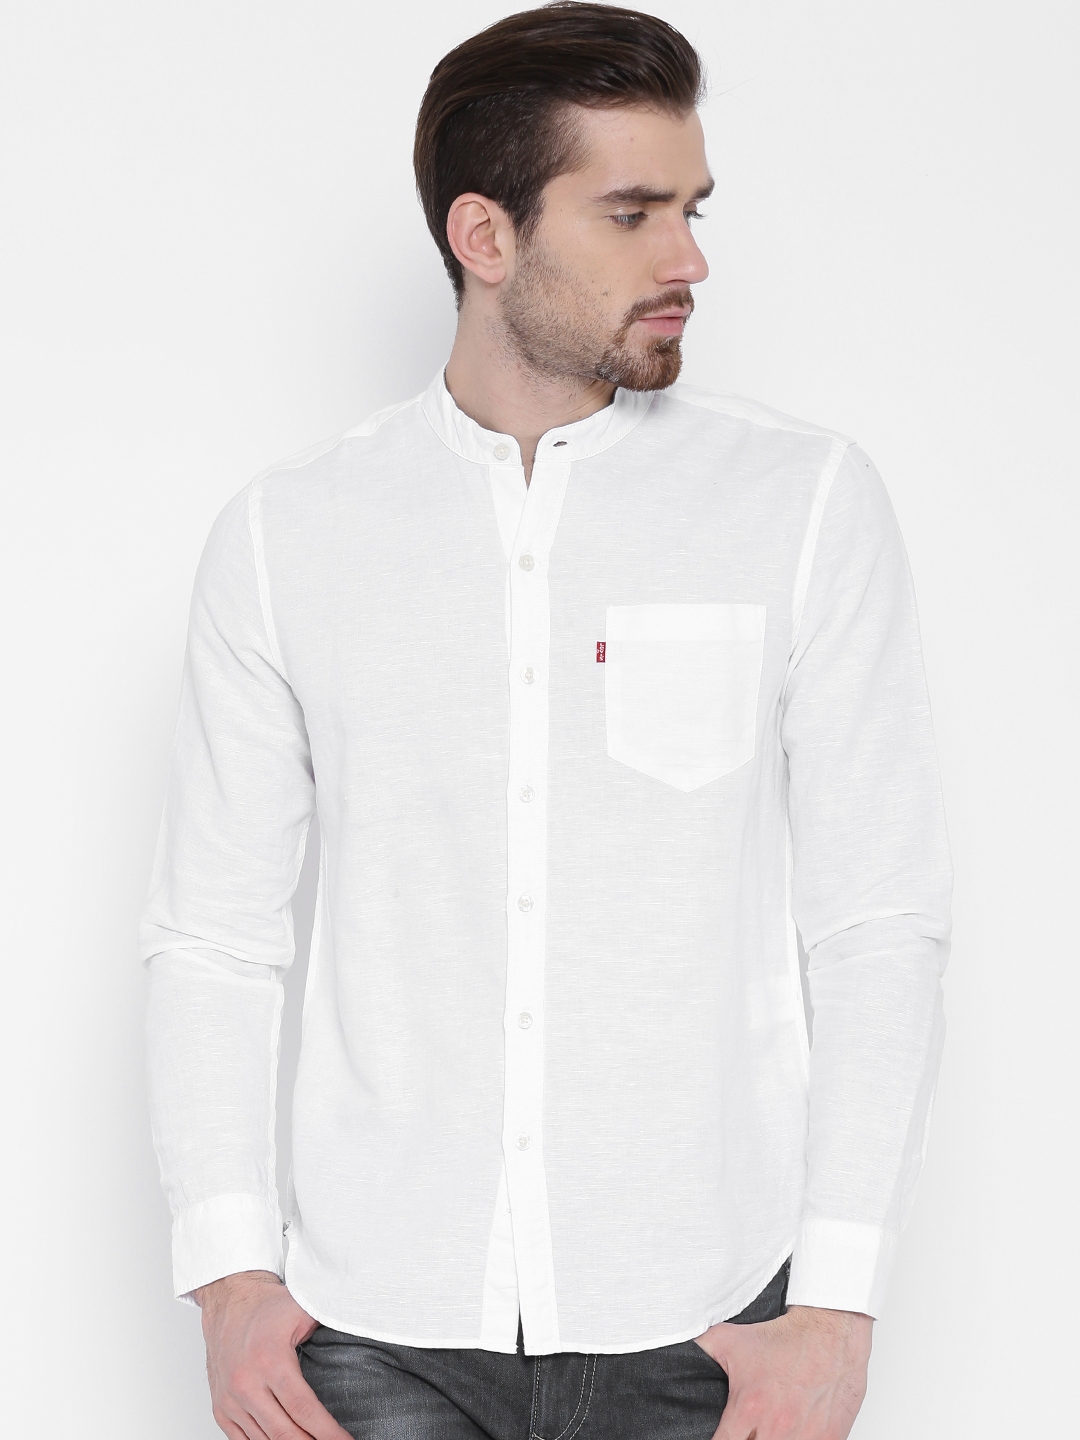 Buy Levis White Slim Fit Linen Casual Shirt - Shirts for Men 1118175 |  Myntra